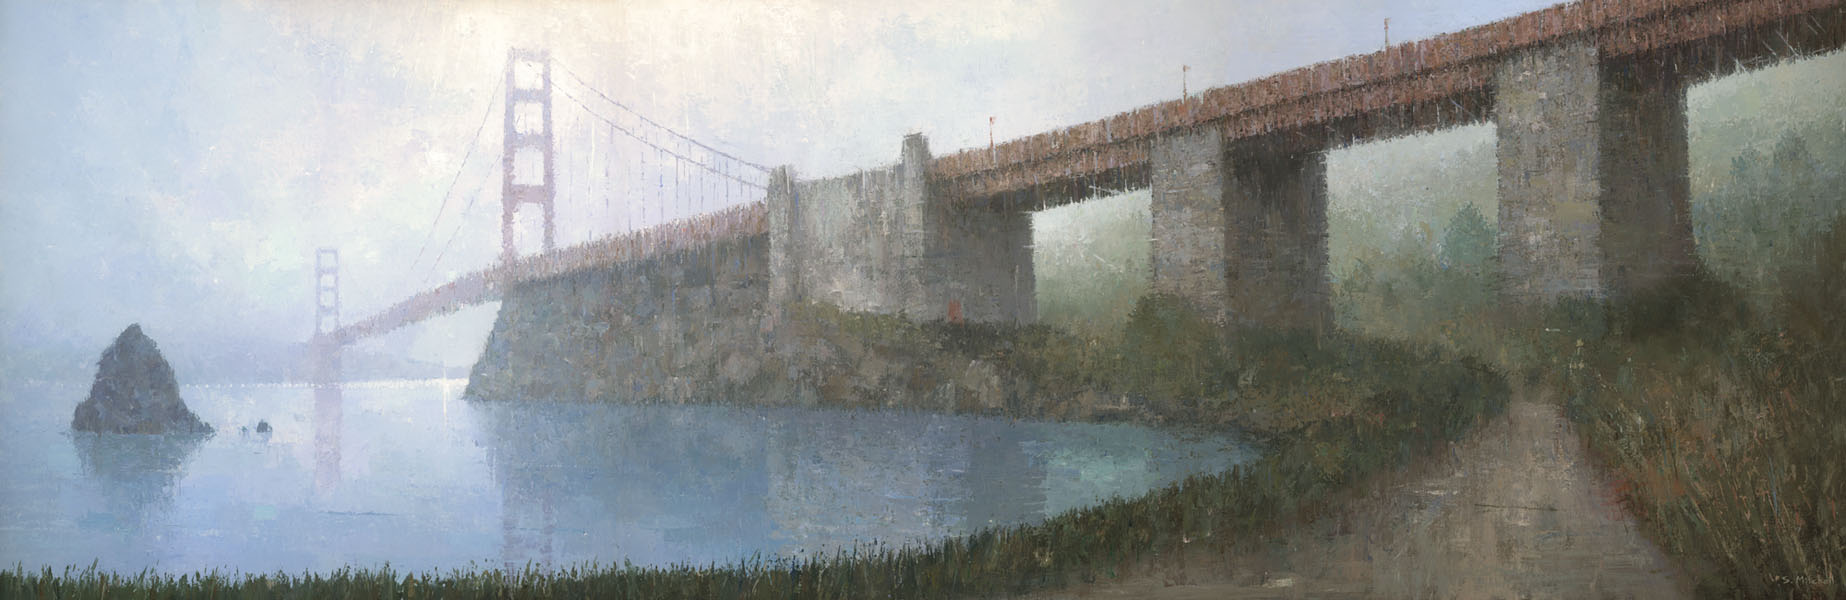 Golden Gate Bridge painting, a misty panoramic landscape painting by artist Stephen Mitchell